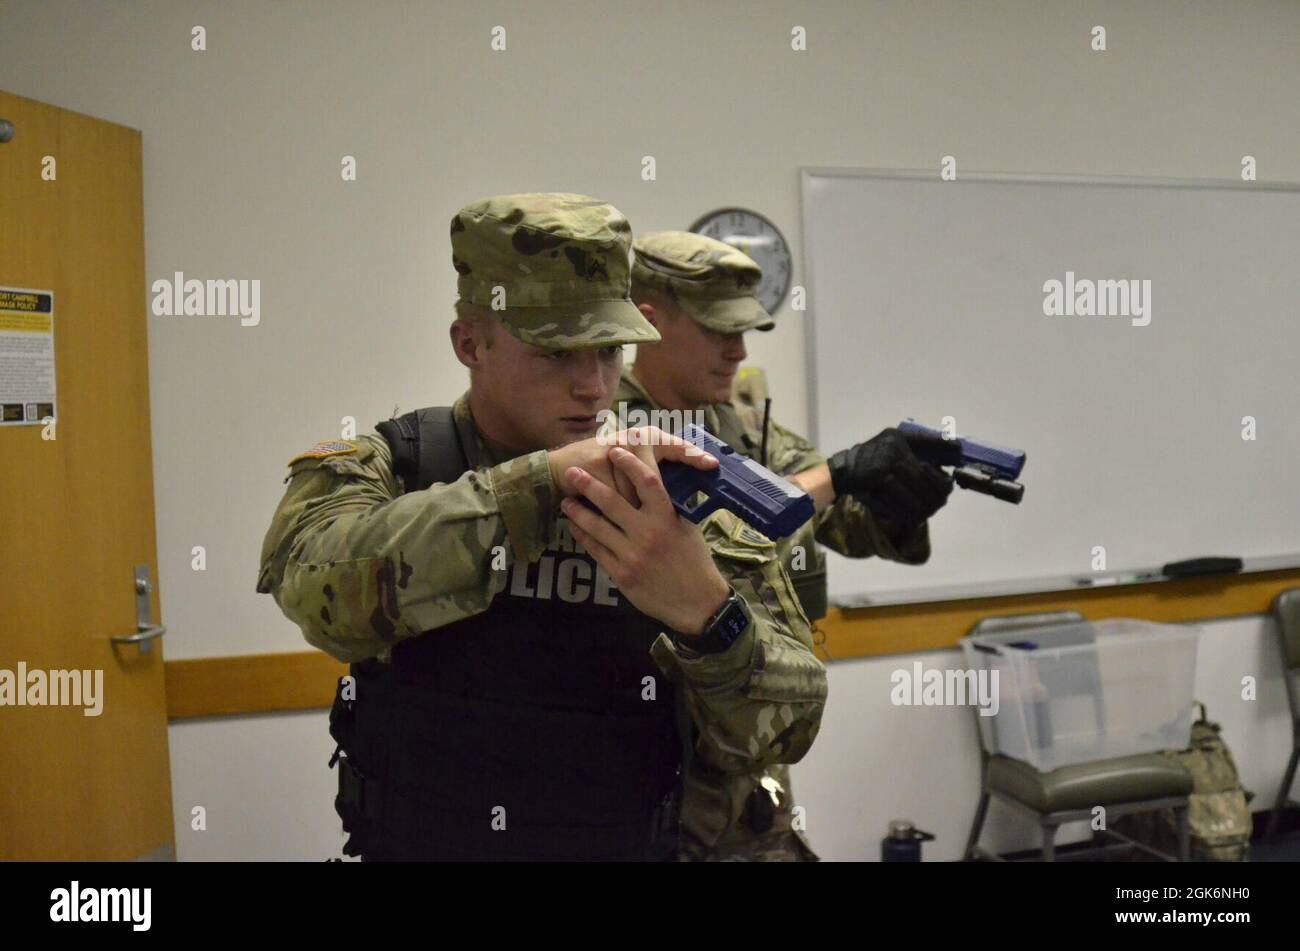 Corporal Kyle Crotty, 561st Military Police Company, 716th Military Police Battalion, left; and Sgt. Jason Wright, collision investigator, Installation Provost Marshal Office, secure a room at Building 6563 Aug. 17 during an active shooter scenario, which was conducted as part of a two-day full-scale exercise. Stock Photo